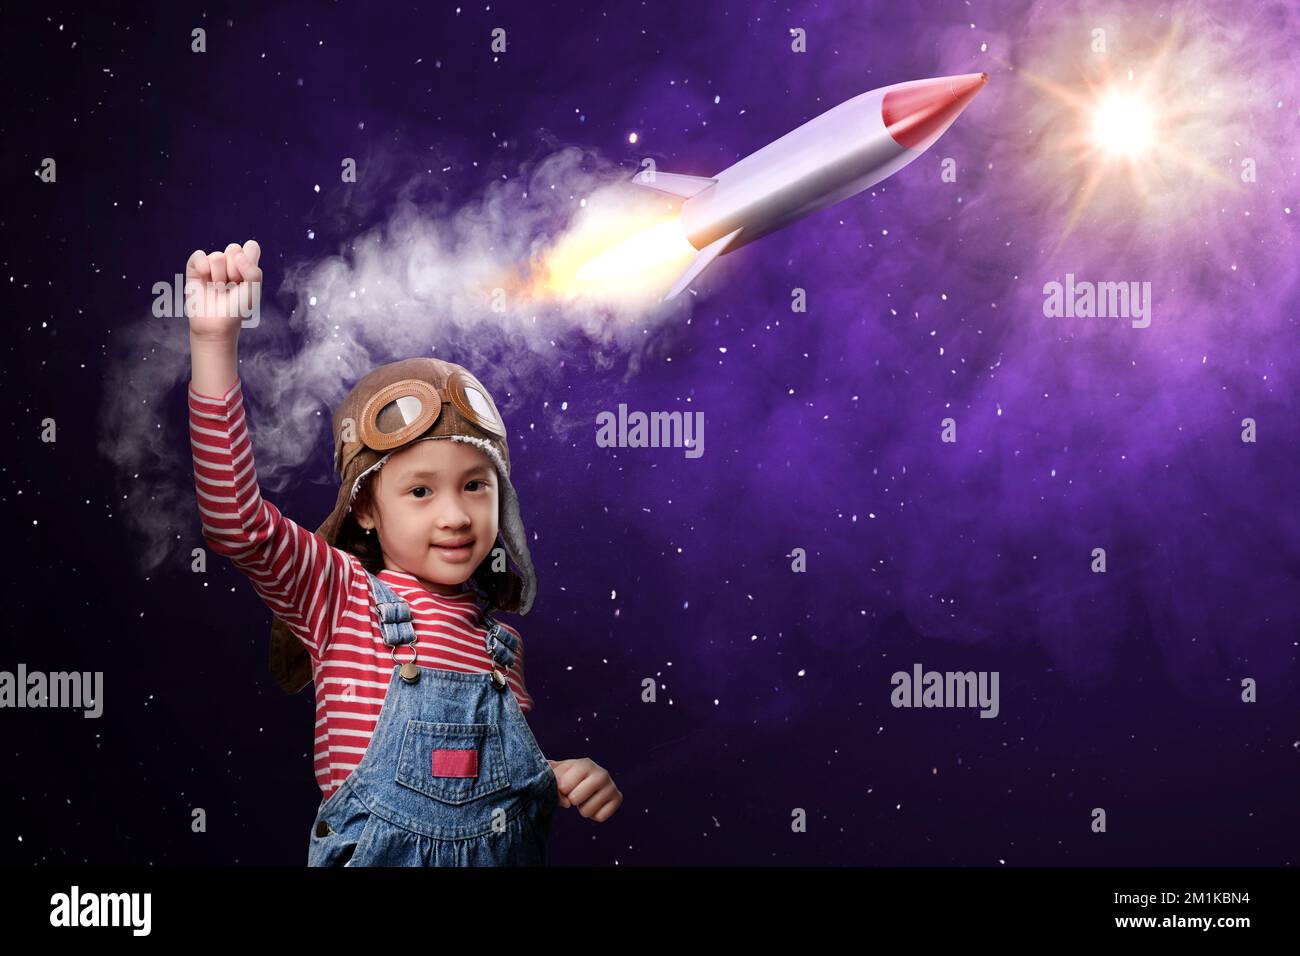 Asian little girl dreaming about flying a rocket. National Science Day Stock Photo